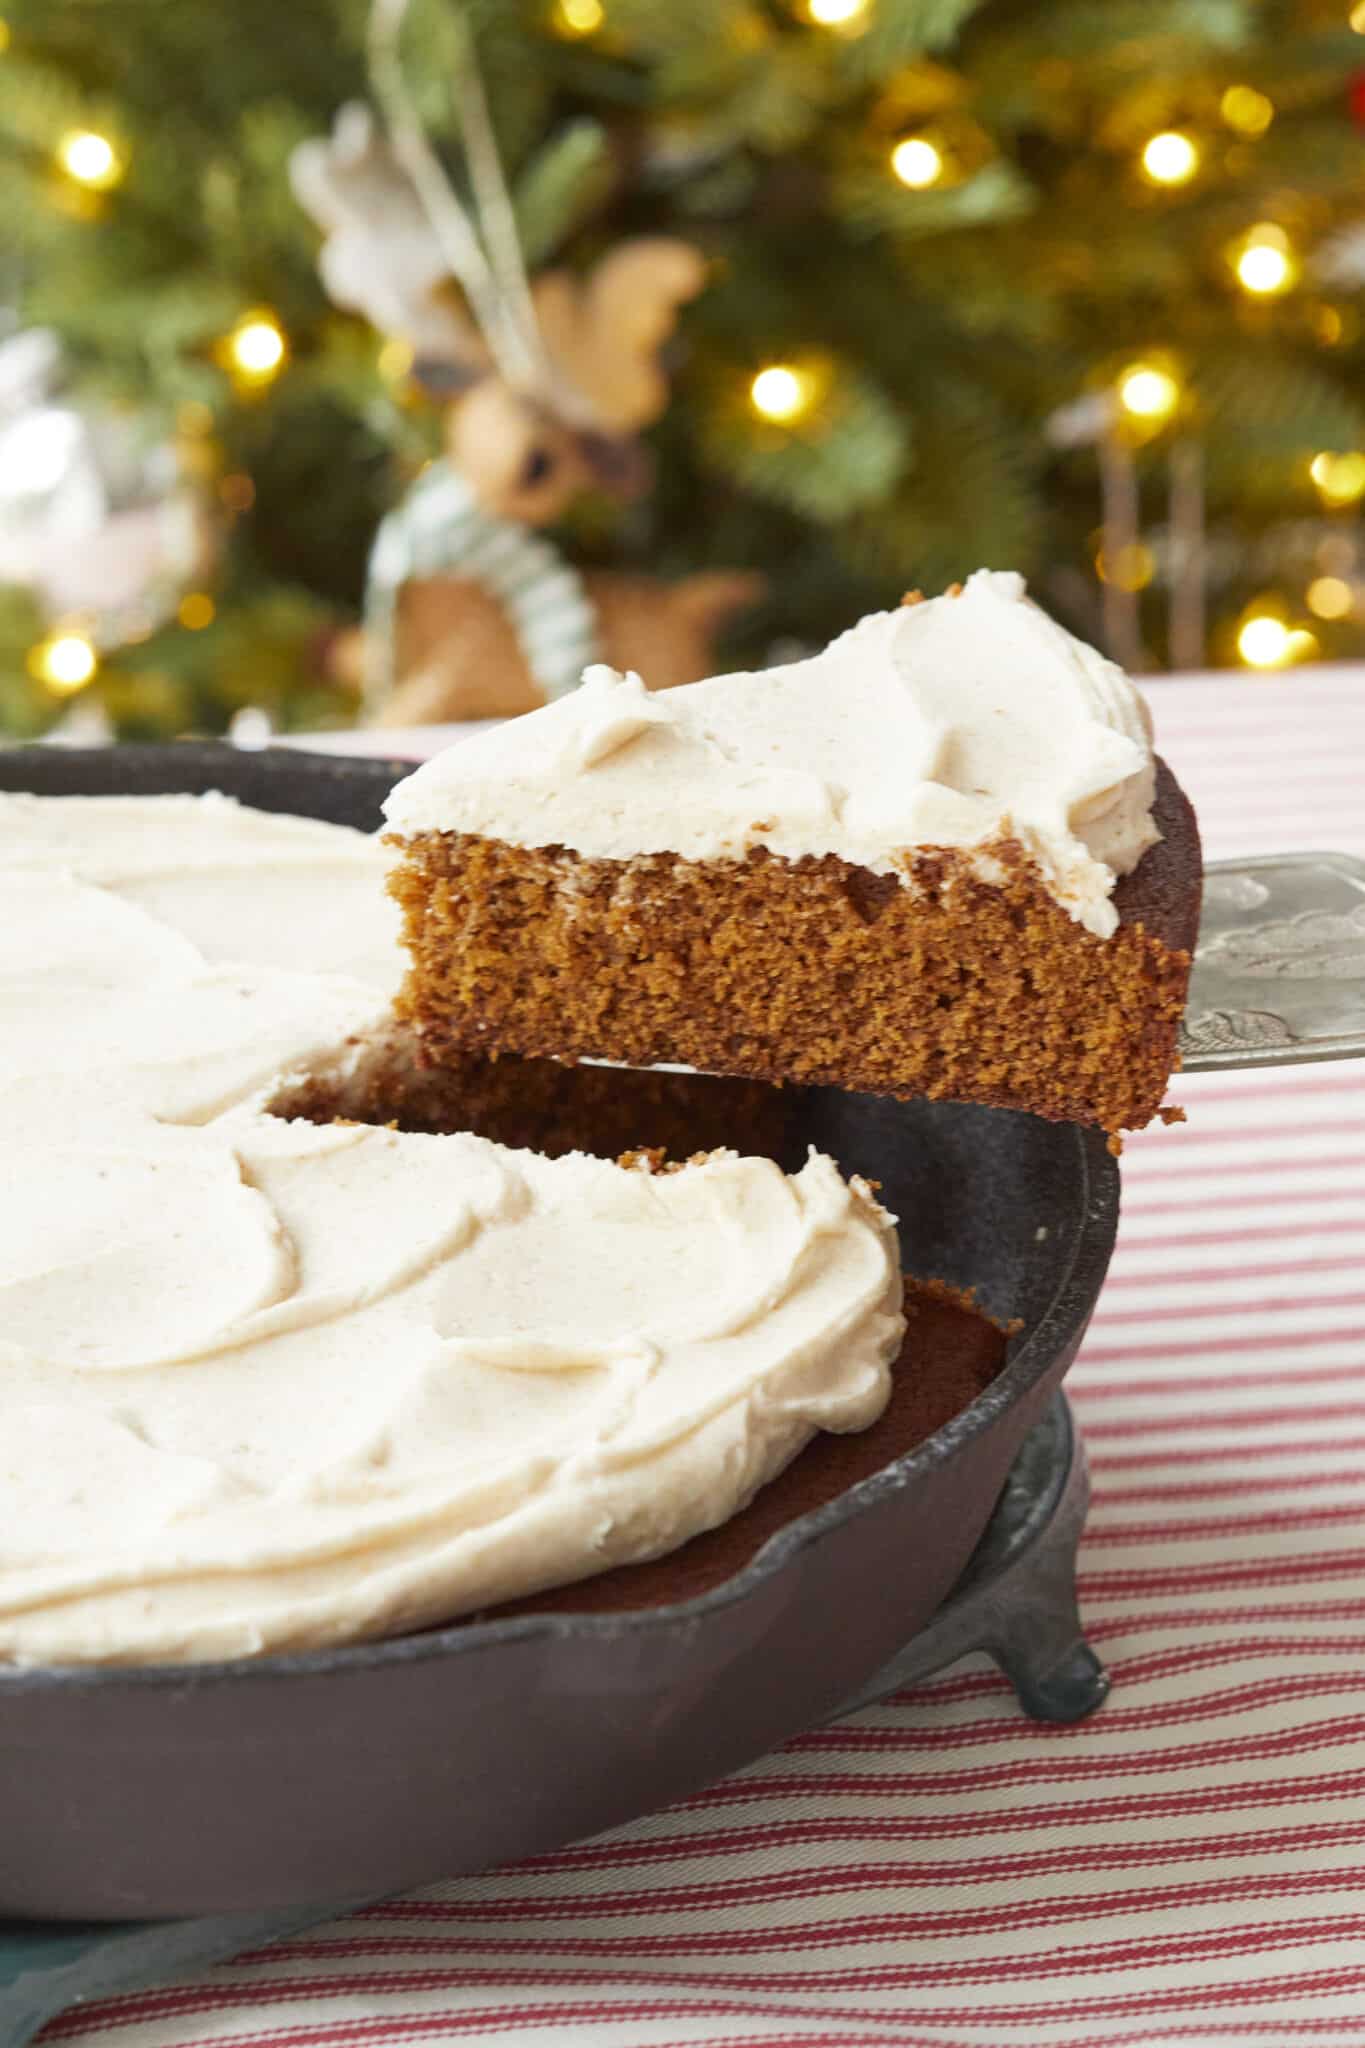 A slice of rich, moist Gingerbread Cake is being lifted from the cast iron skillet, crowned with velvety Brown Butter Frosting. A Christmas Tree with lights on is in the background. 